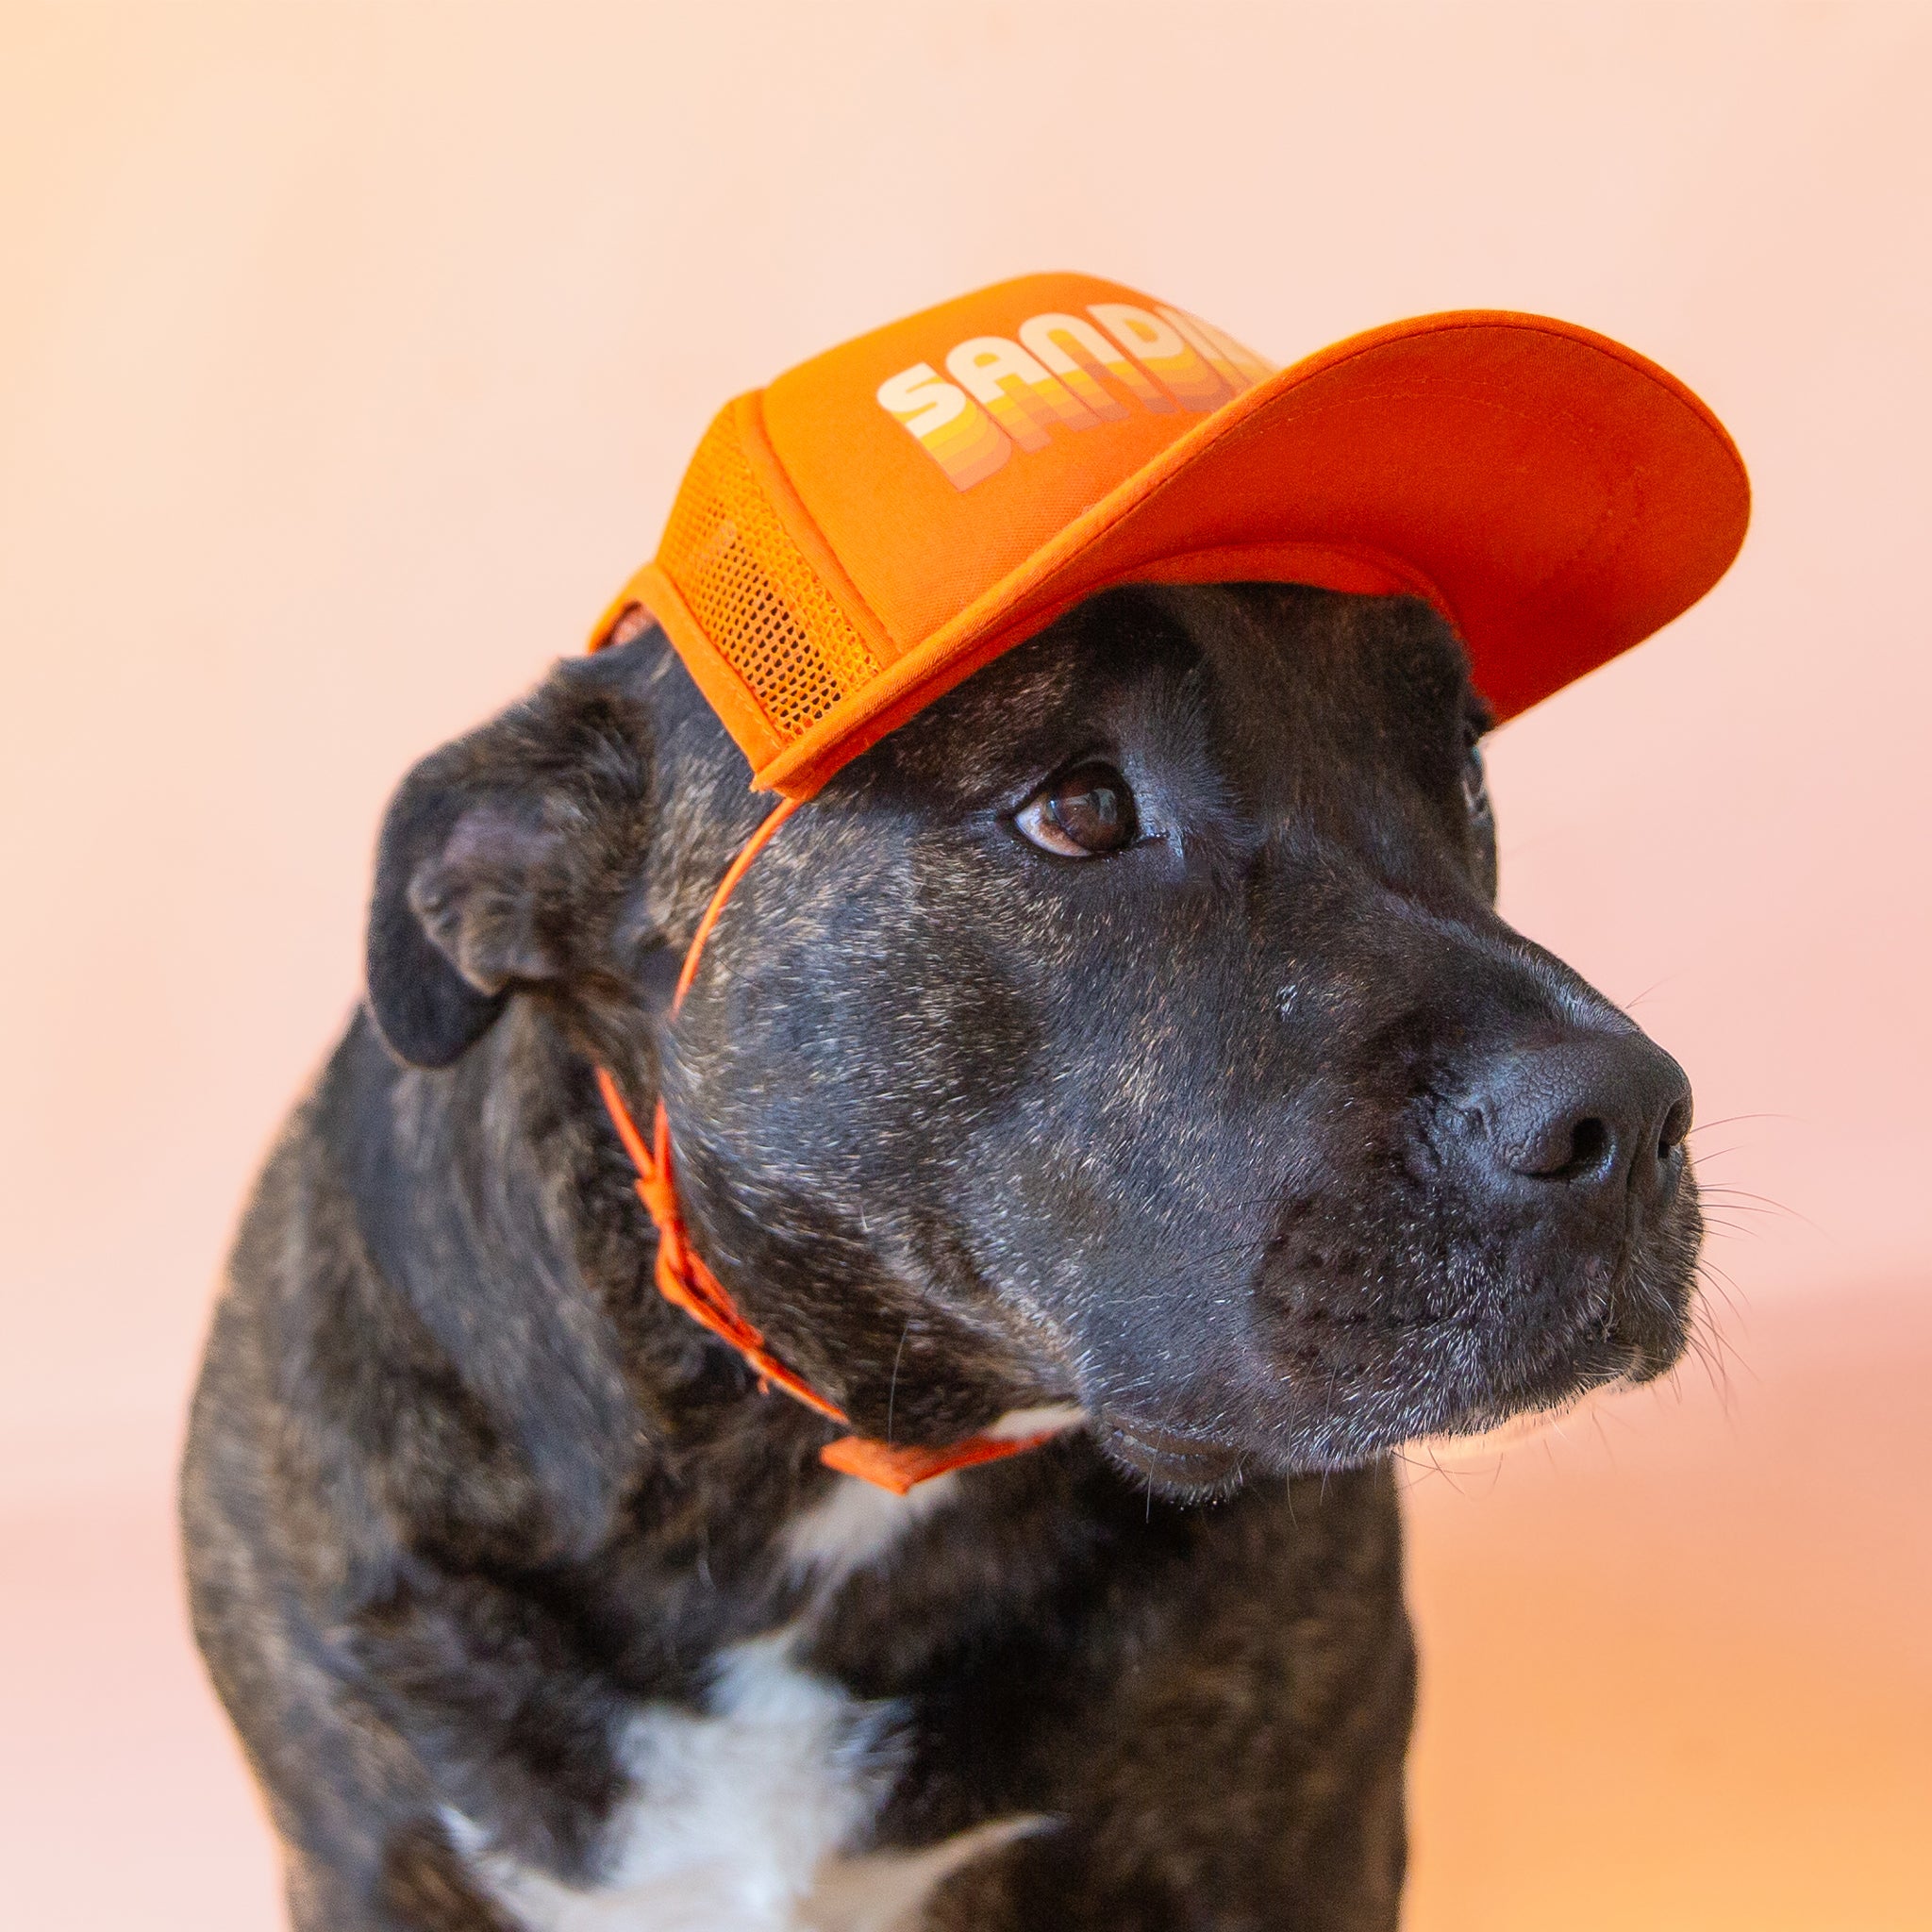 An orange puplid hat with text along the front that reads, &quot;San Diego&quot; and a neck strap.